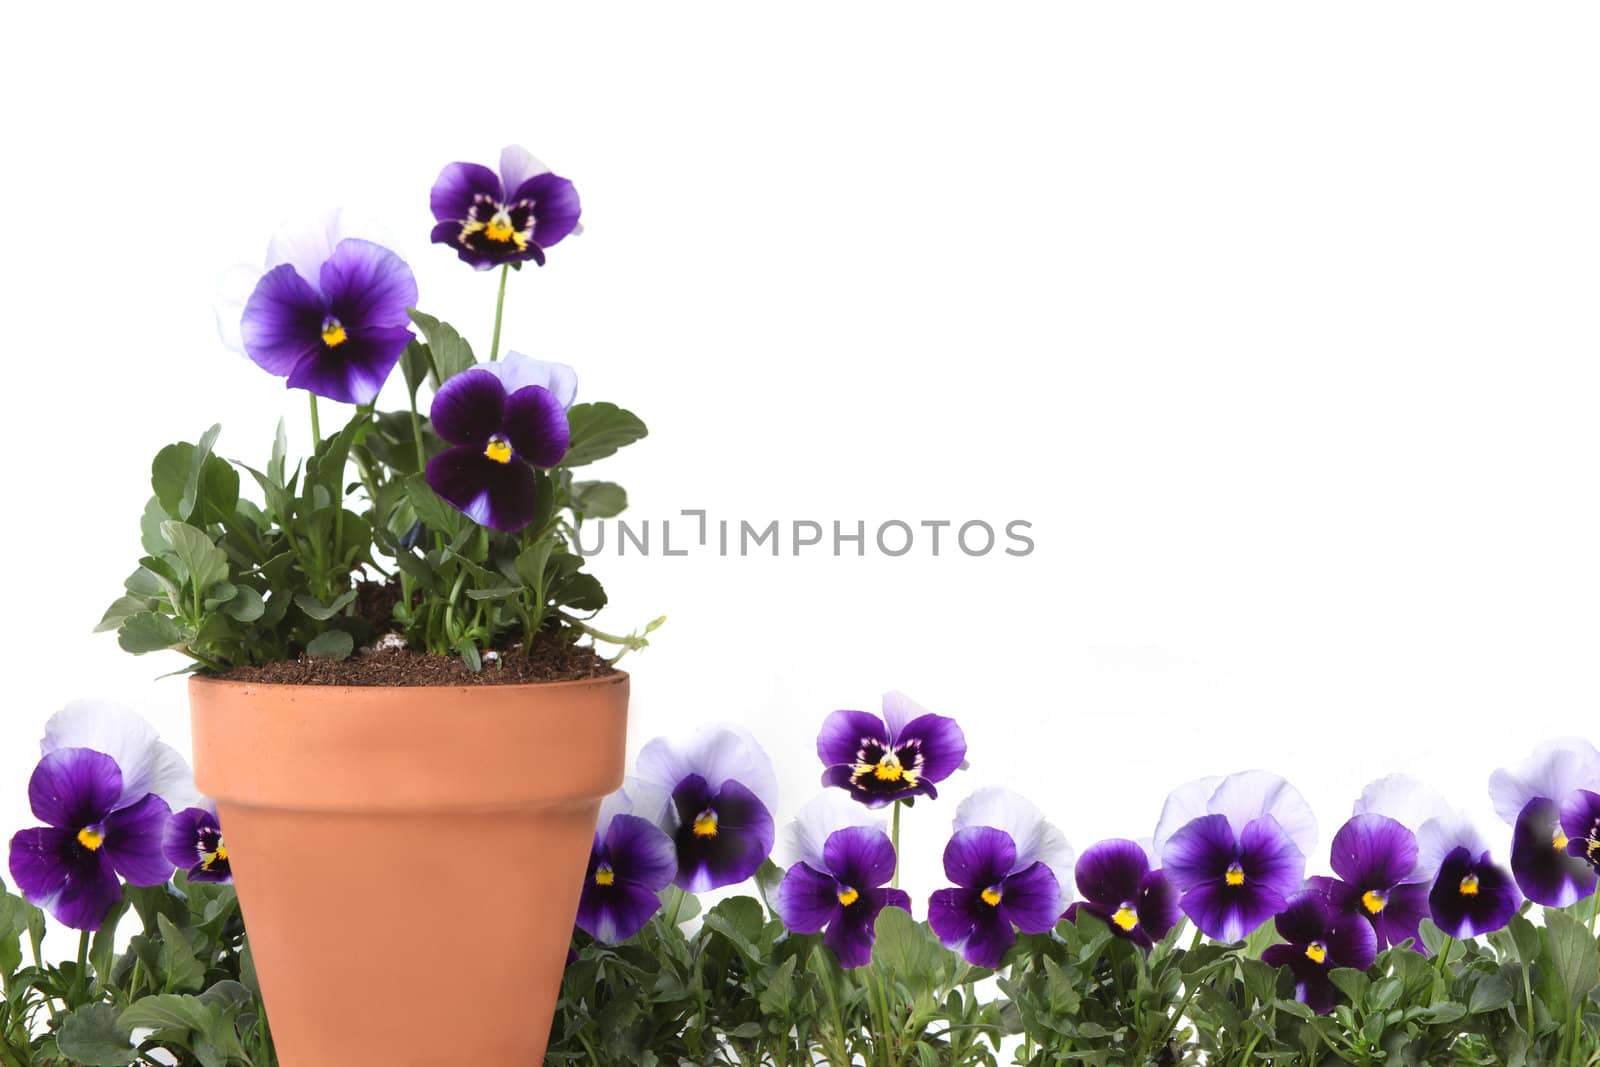 Pansies in a Row and in a Clay Pot by tobkatrina